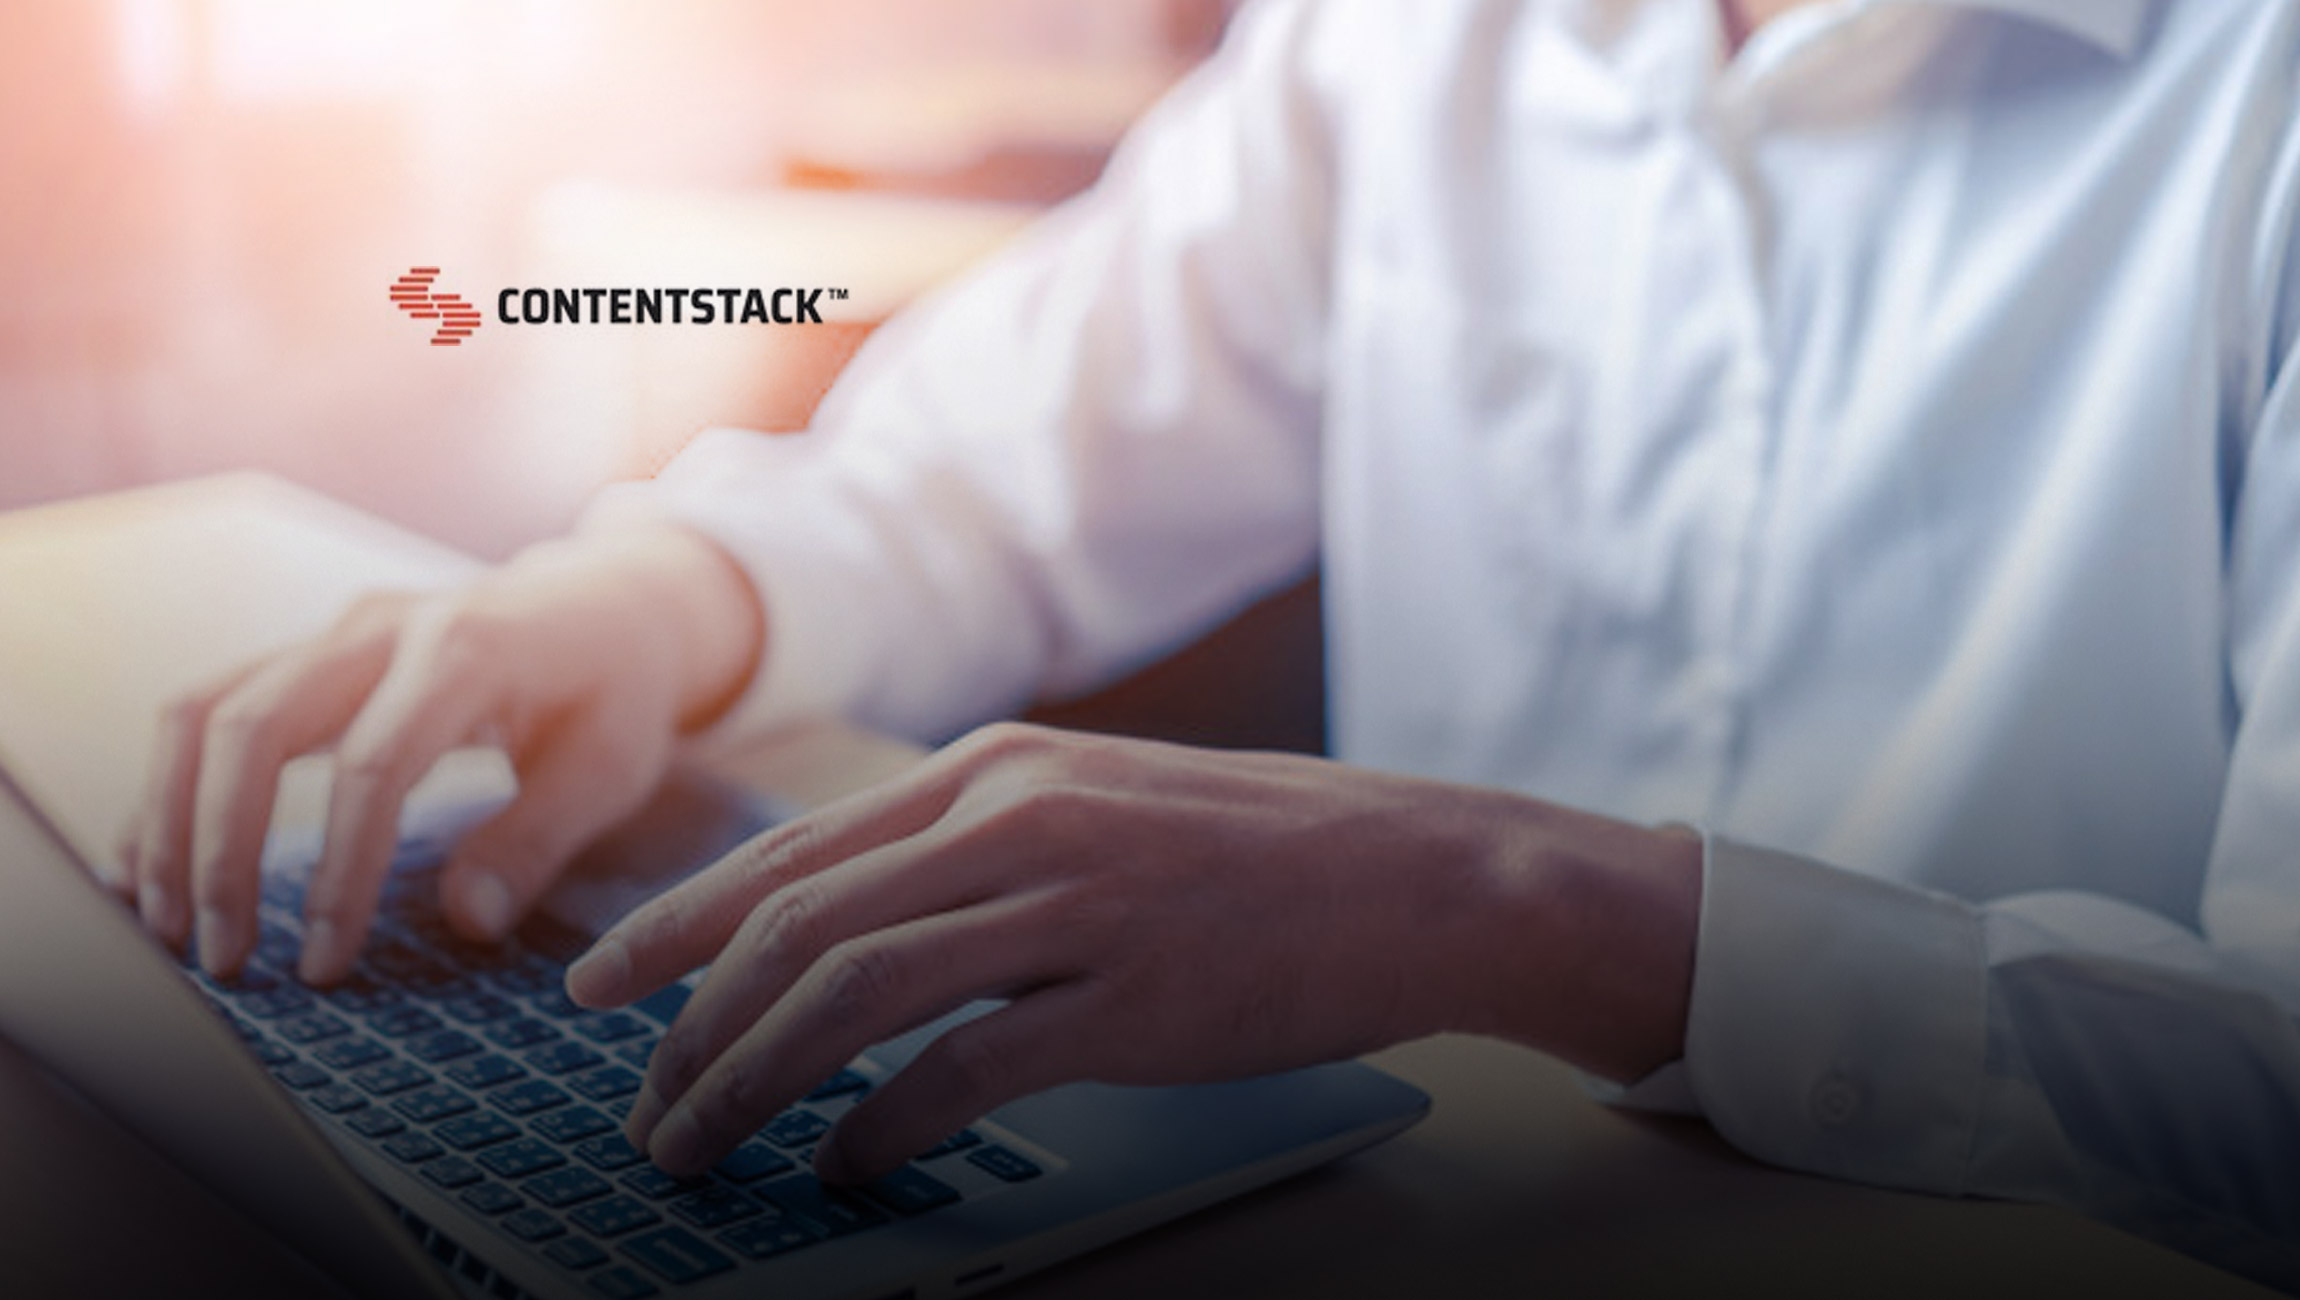 Contentstack Named a Strong Performer in Agile Content Management Systems by Independent Research Firm